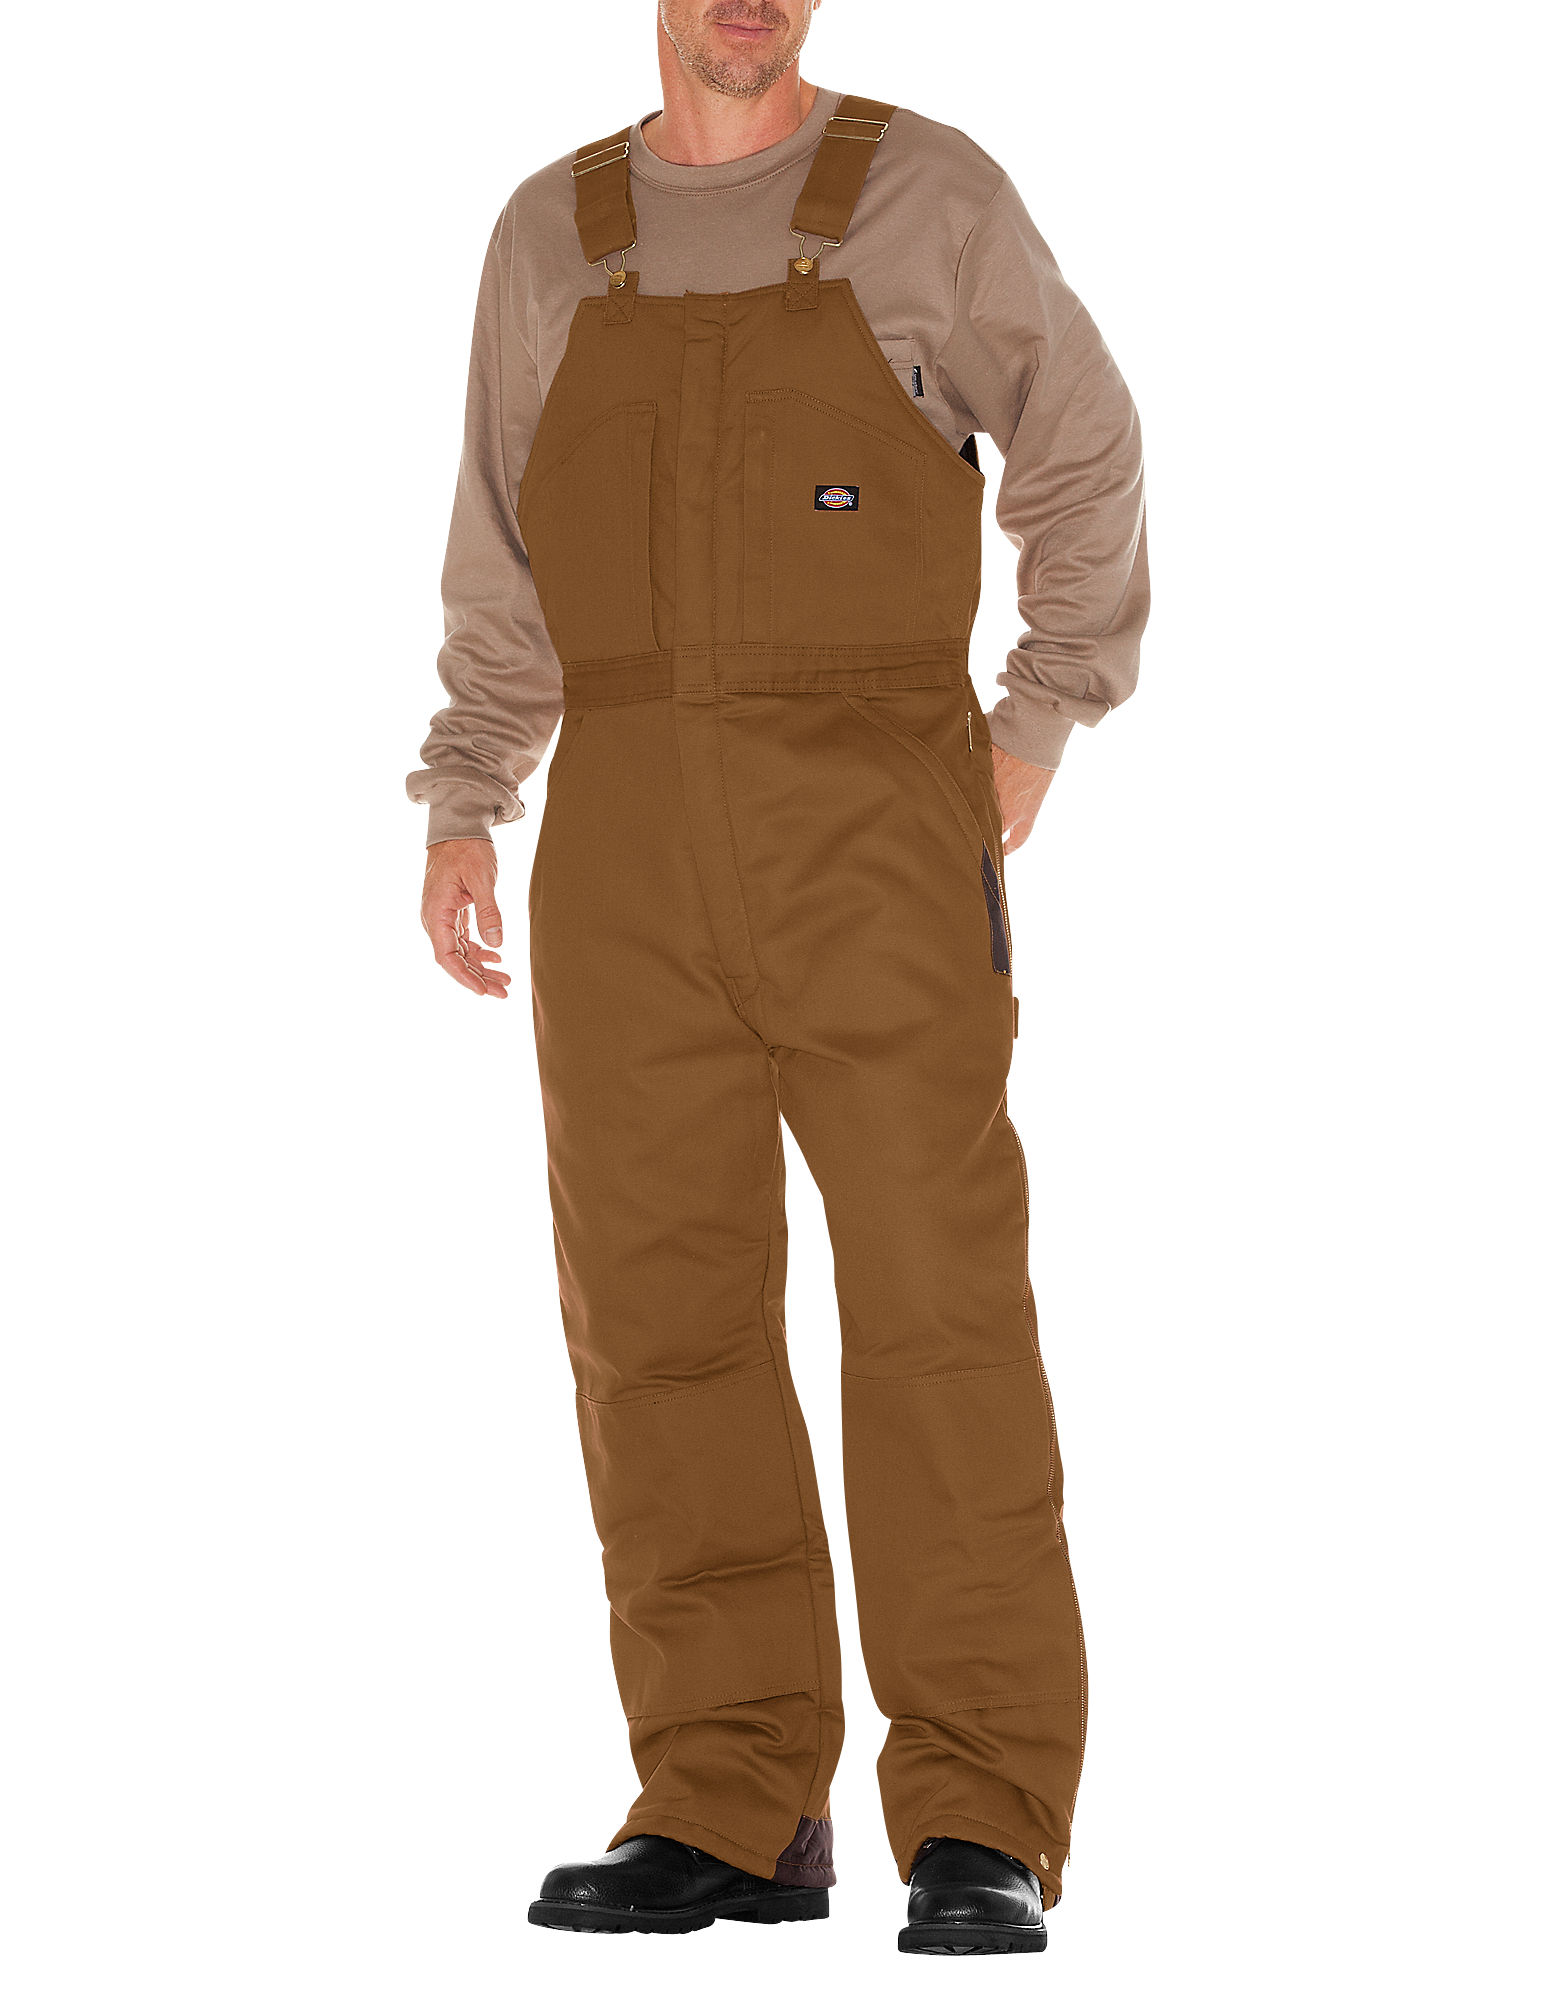 Dickies Mens Sanded Duck Insulated Bib Overall